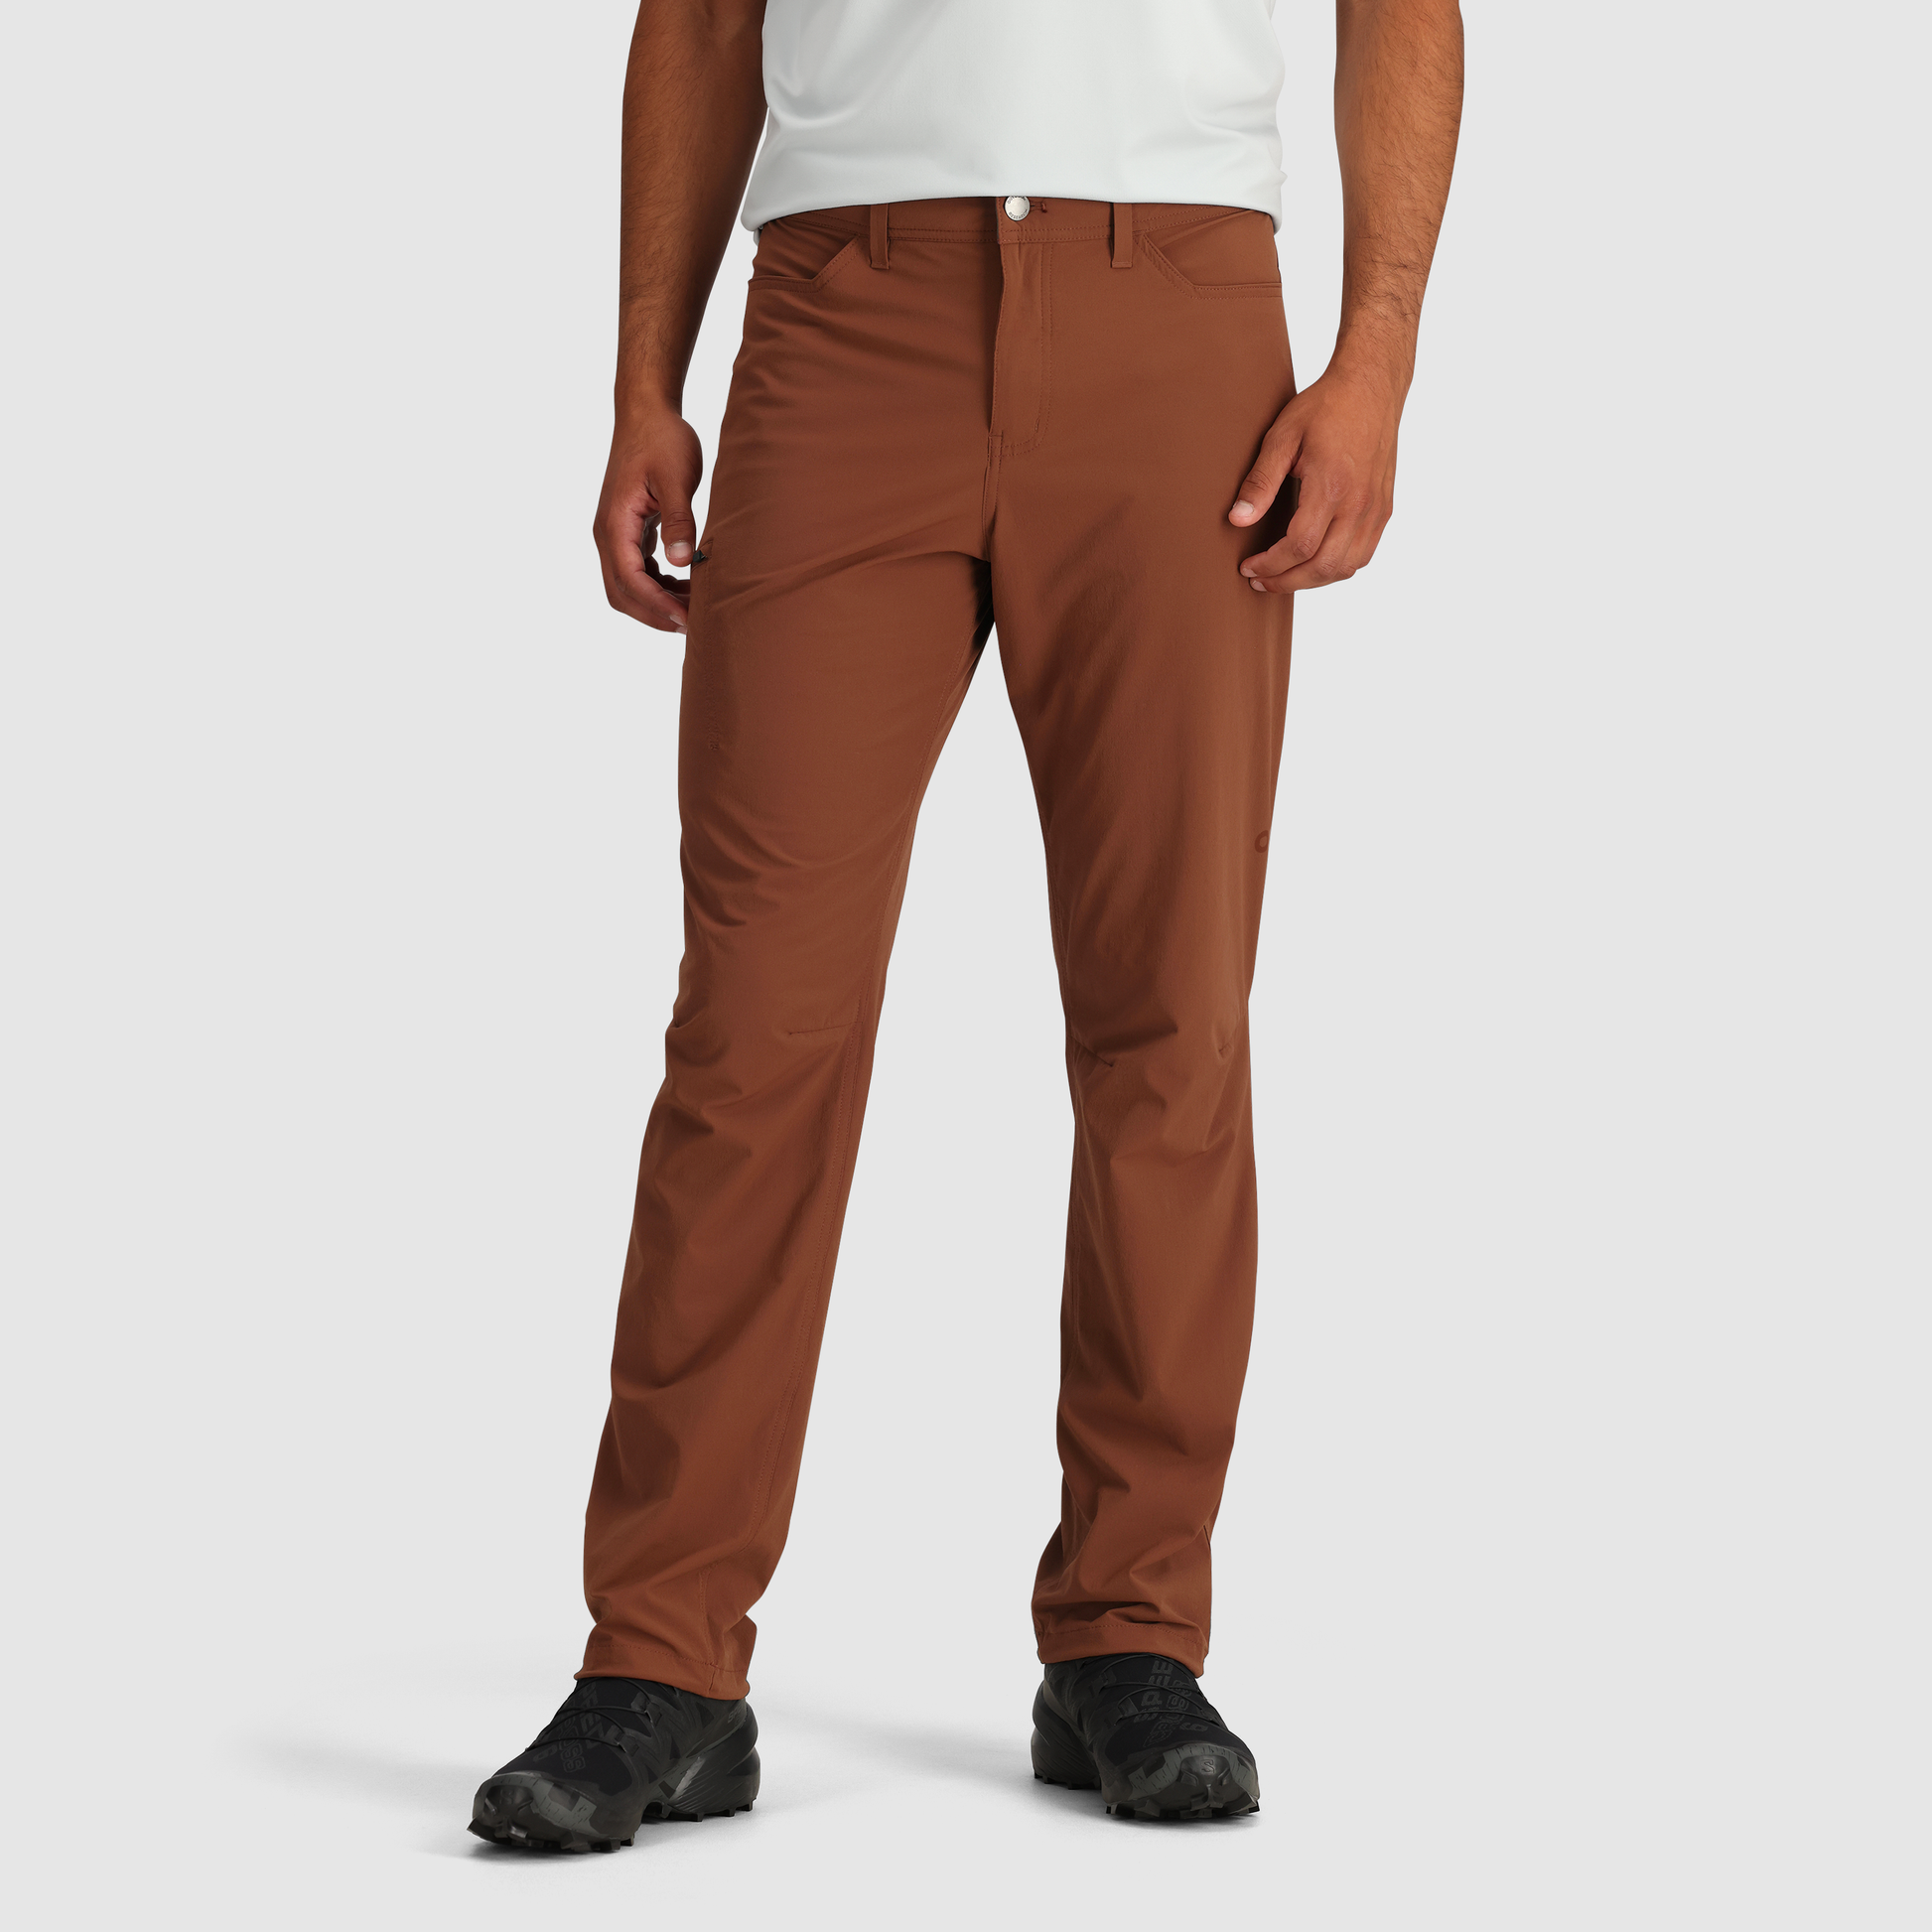 Buy Gsoon Men's Lycra Trouser (Off White Color) (X-Large) at